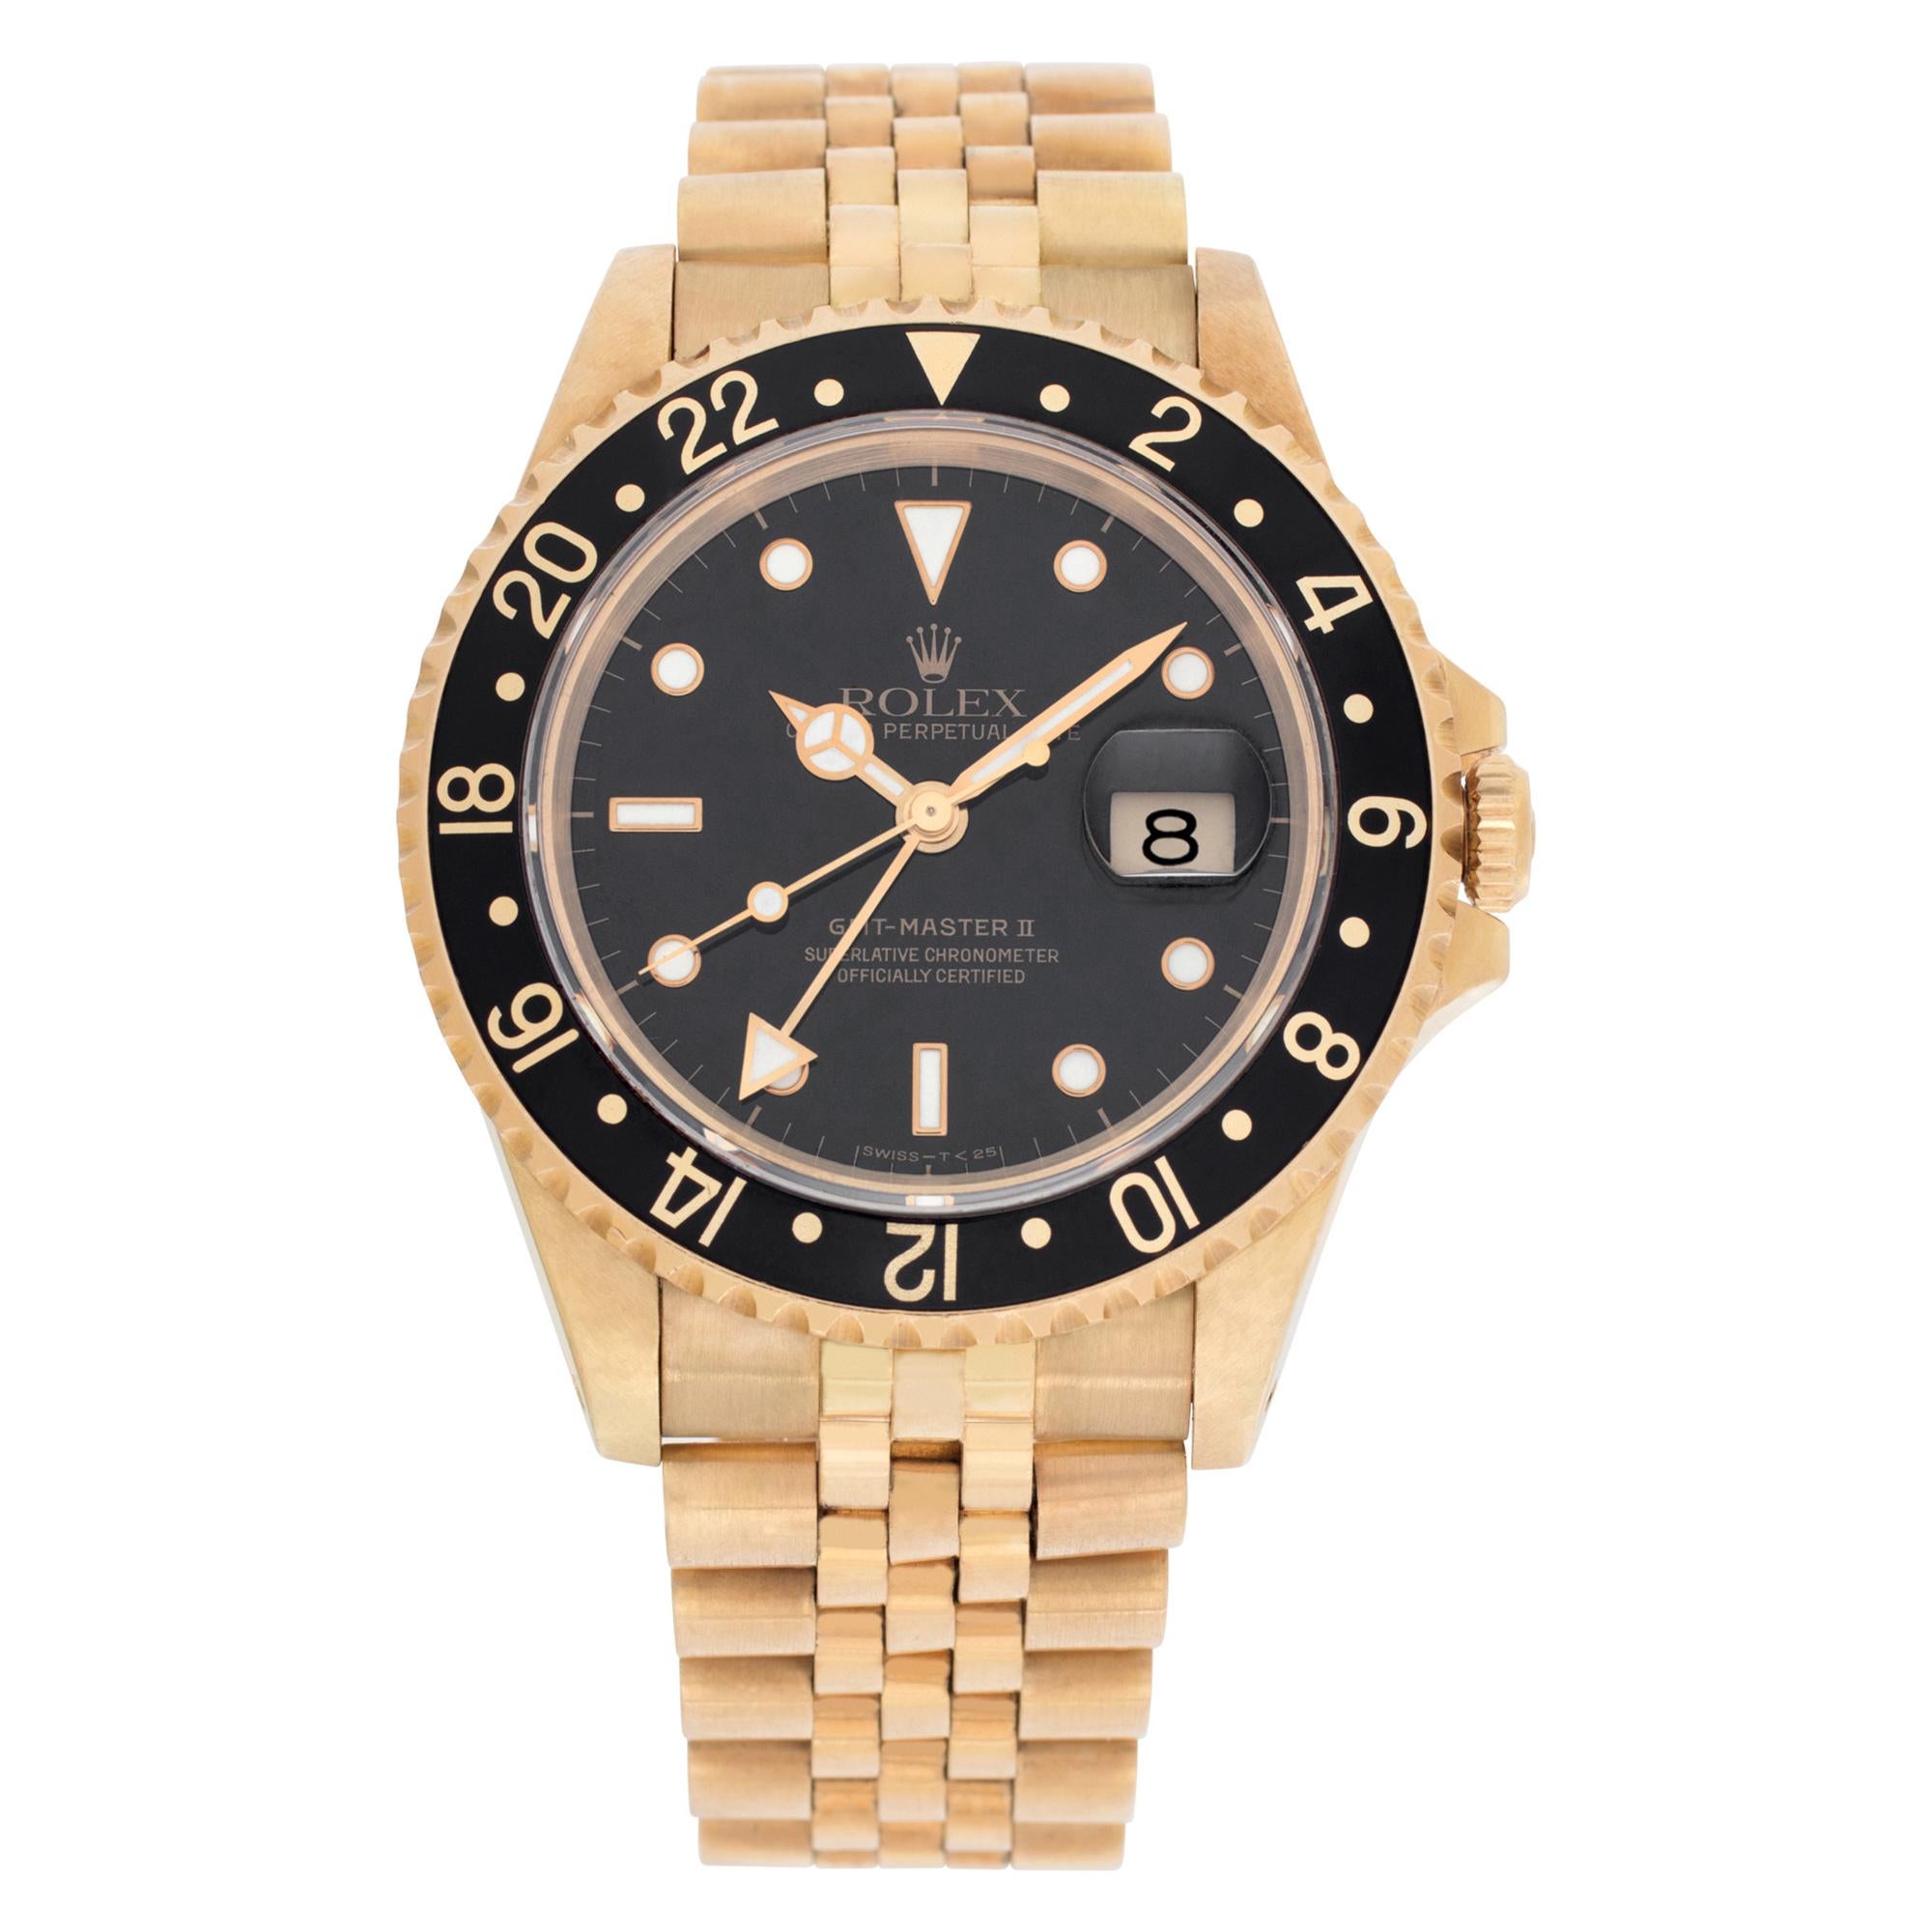 Rolex GMT-Master II 16718 in yellow gold with aBlack dial 40mm Automatic watch For Sale